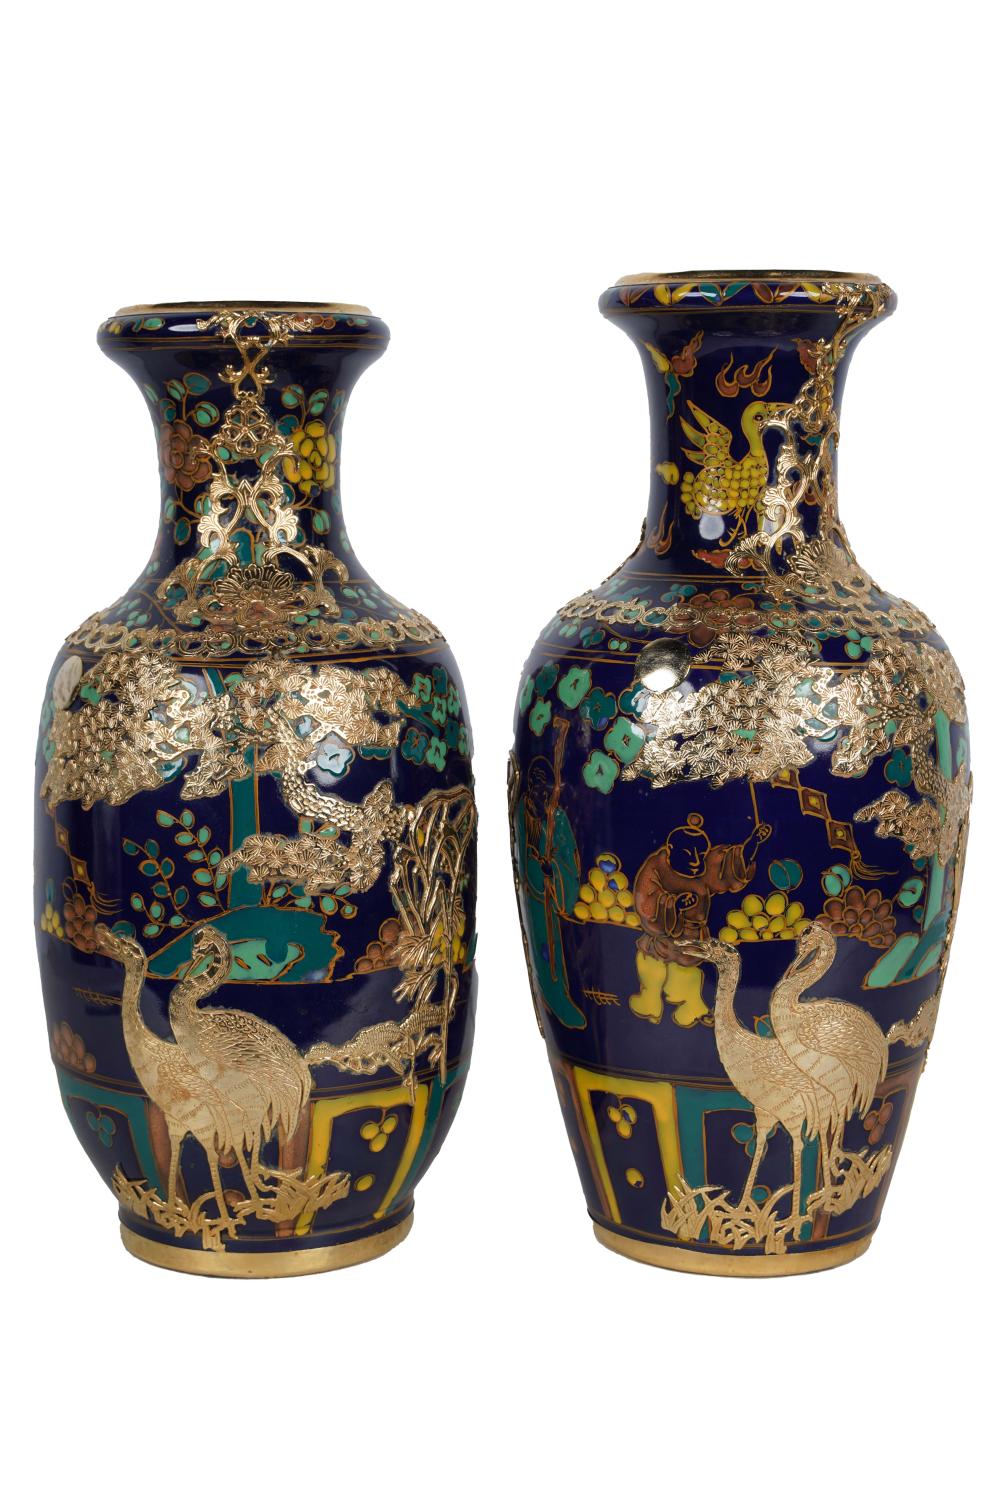 PAIR OF CHINESE PORCELAIN VASESwith 332352